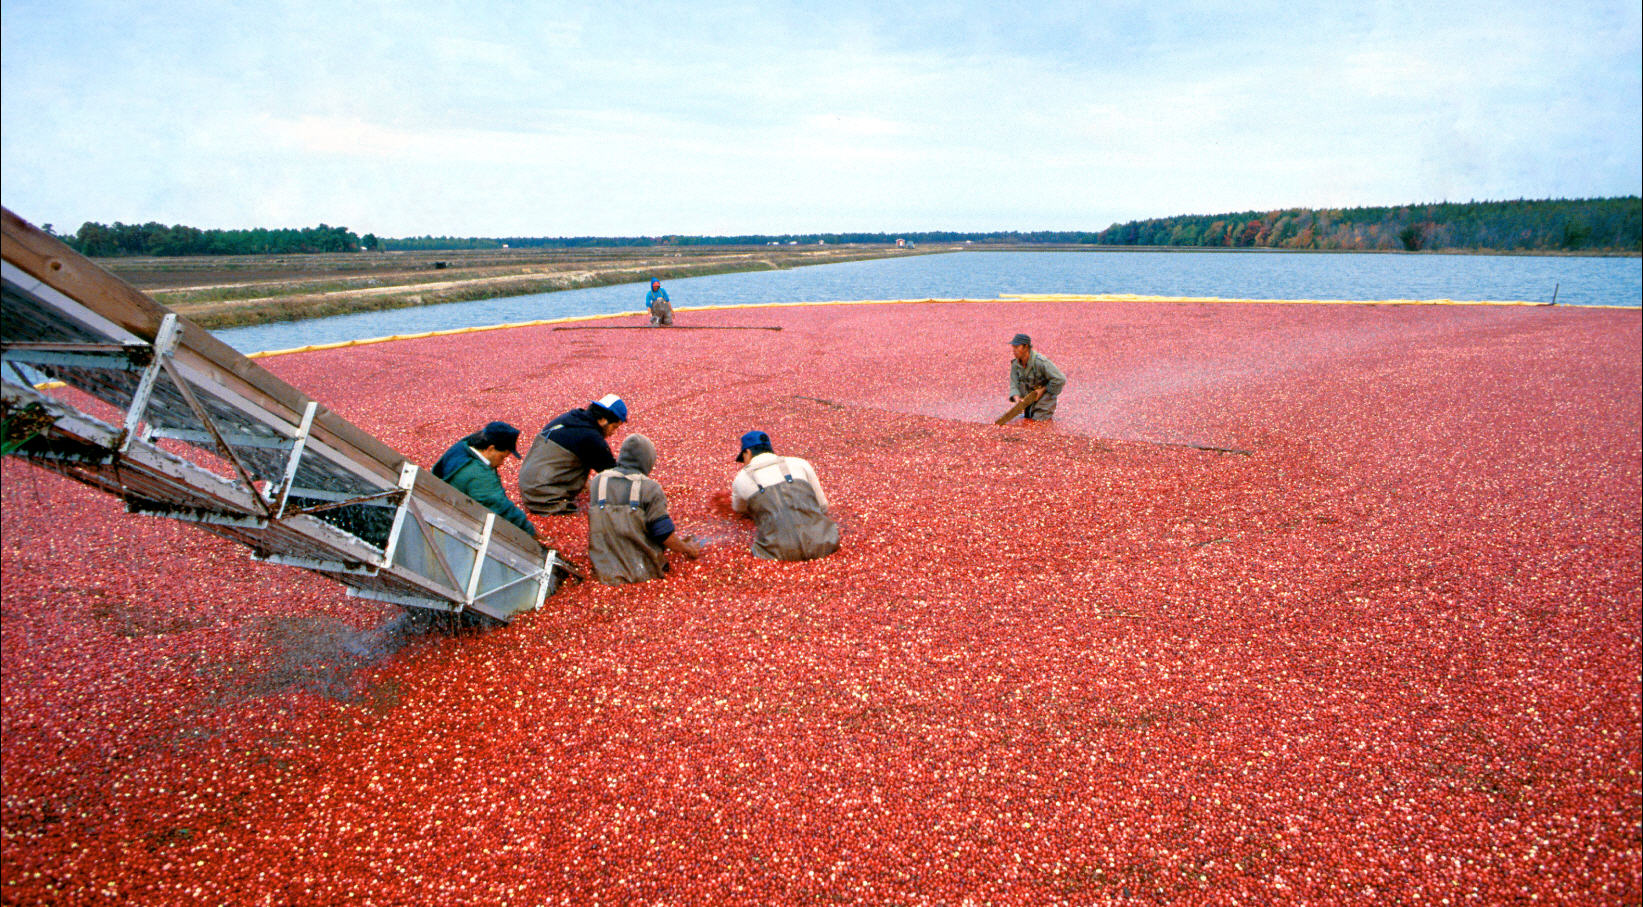 America’s cranberry farmers are in the homestretch of the harvest in what looks to be another banner year for US cranberry production, reports the USDA Foreign Agricultural Service.